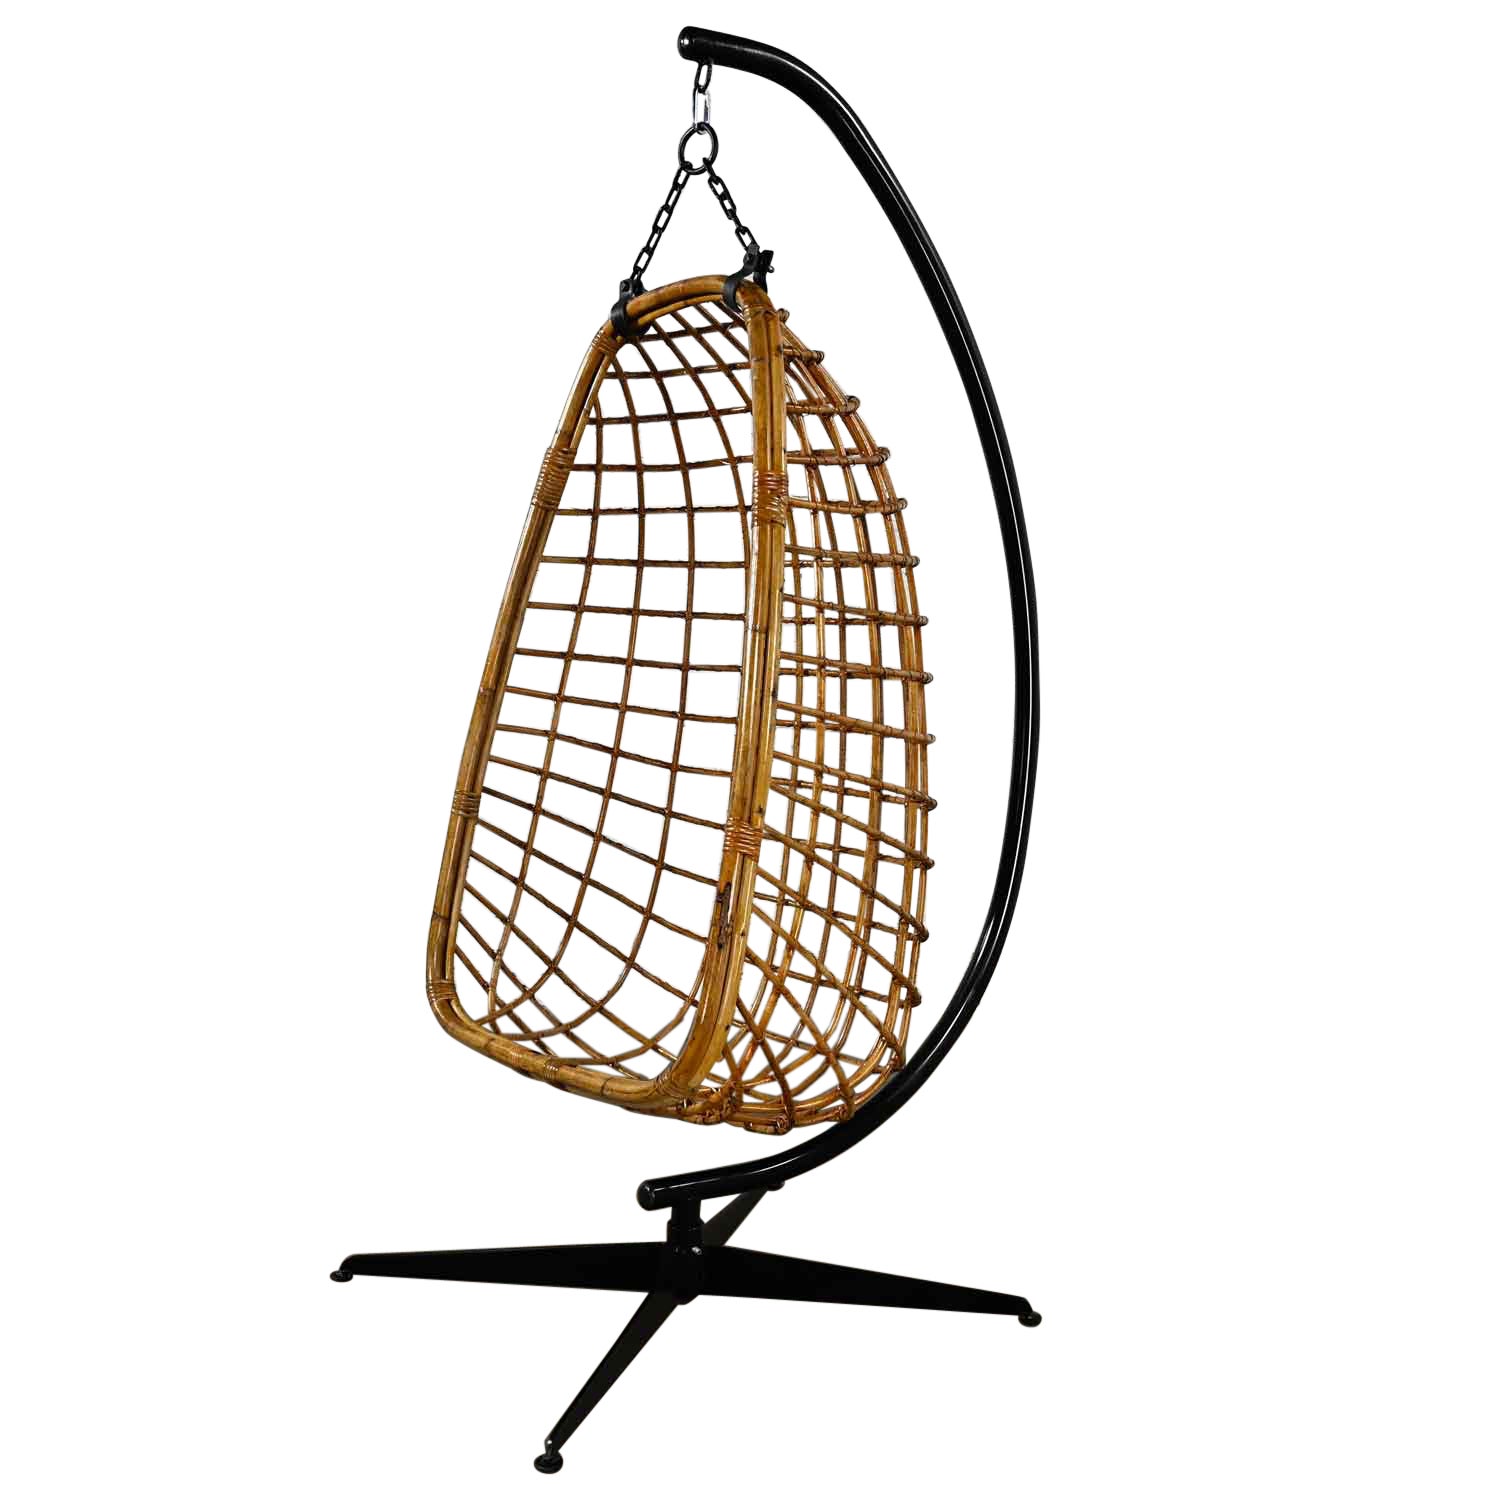 Mid-Century Modern Wicker Rattan Hanging Basket Chair & Black Painted Stand